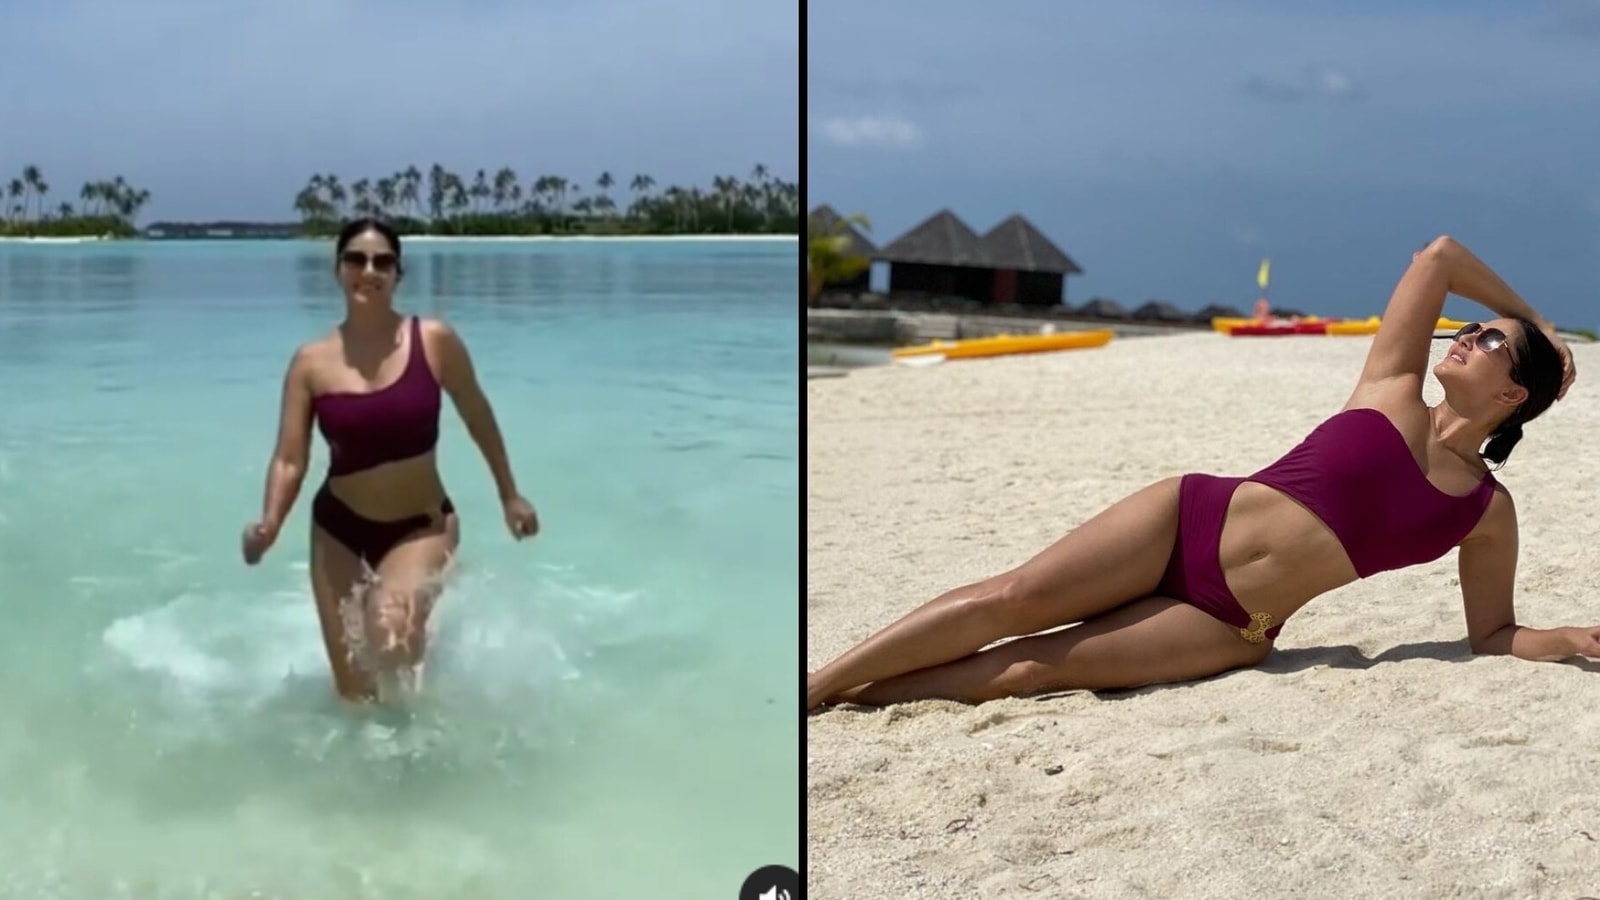 Sunny Leone does slo-mo run as she emerges from water, blows kiss. Watch  video from Maldives holiday | Bollywood - Hindustan Times